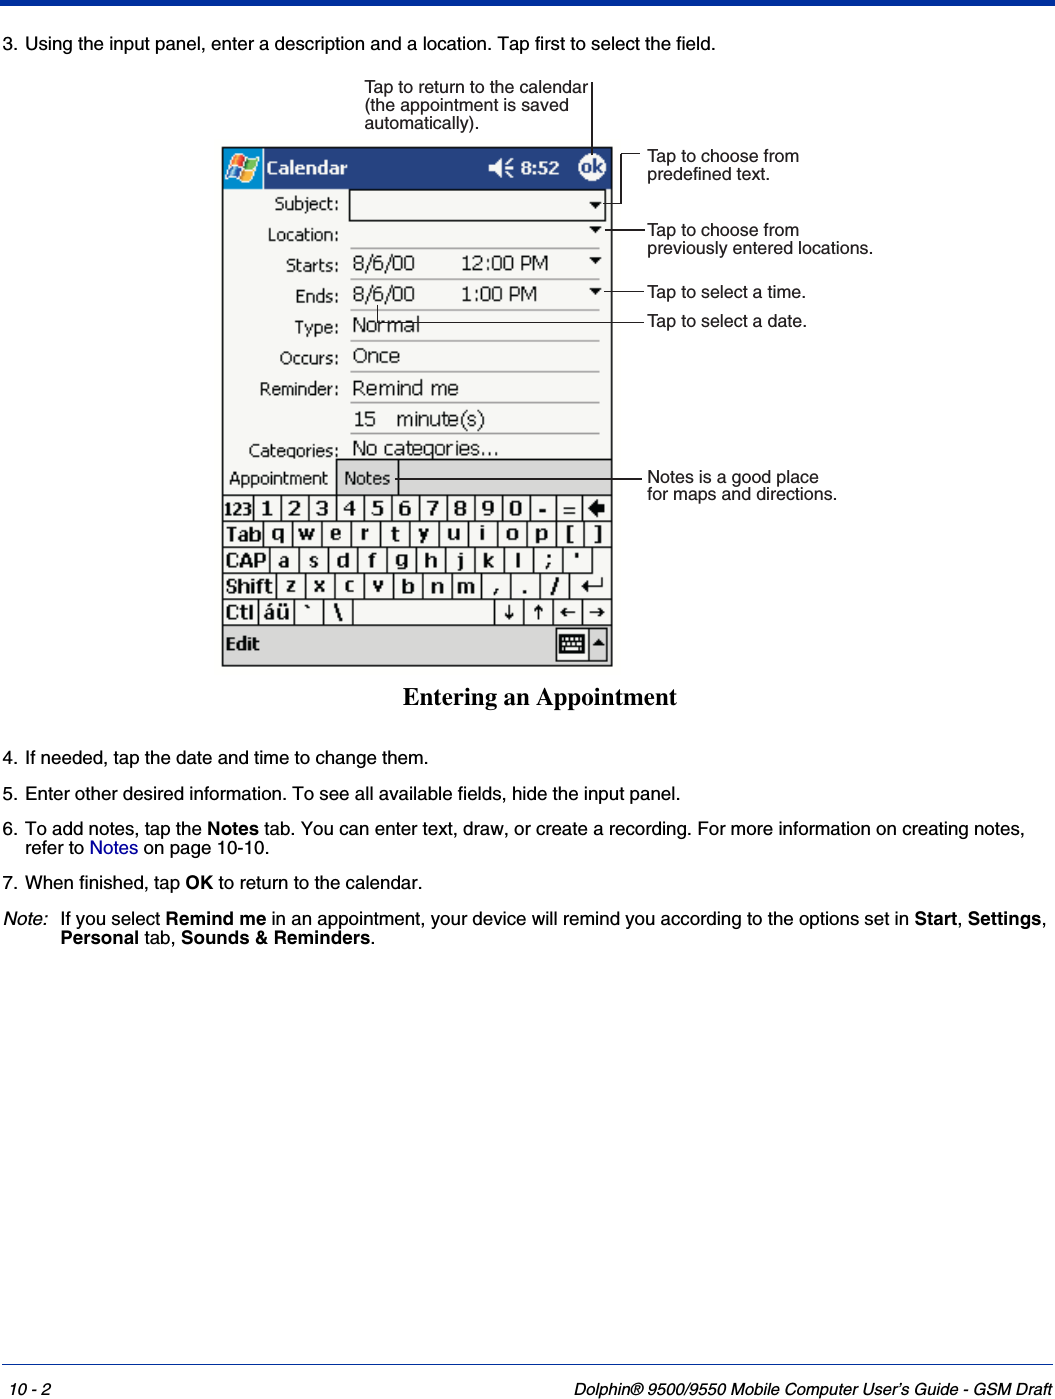 10 - 2 Dolphin® 9500/9550 Mobile Computer User’s Guide - GSM Draft3. Using the input panel, enter a description and a location. Tap first to select the field. 4. If needed, tap the date and time to change them.5. Enter other desired information. To see all available fields, hide the input panel.6. To add notes, tap the Notes tab. You can enter text, draw, or create a recording. For more information on creating notes, refer to Notes on page 10-10.7. When finished, tap OK to return to the calendar. Note: If you select Remind me in an appointment, your device will remind you according to the options set in Start, Settings, Personal tab, Sounds &amp; Reminders. Tap to select a date.Tap to select a time.Tap to return to the calendar(the appointment is savedautomatically).Tap to choose frompreviously entered locations.Tap to choose frompredefined text.Notes is a good placefor maps and directions.Entering an Appointment